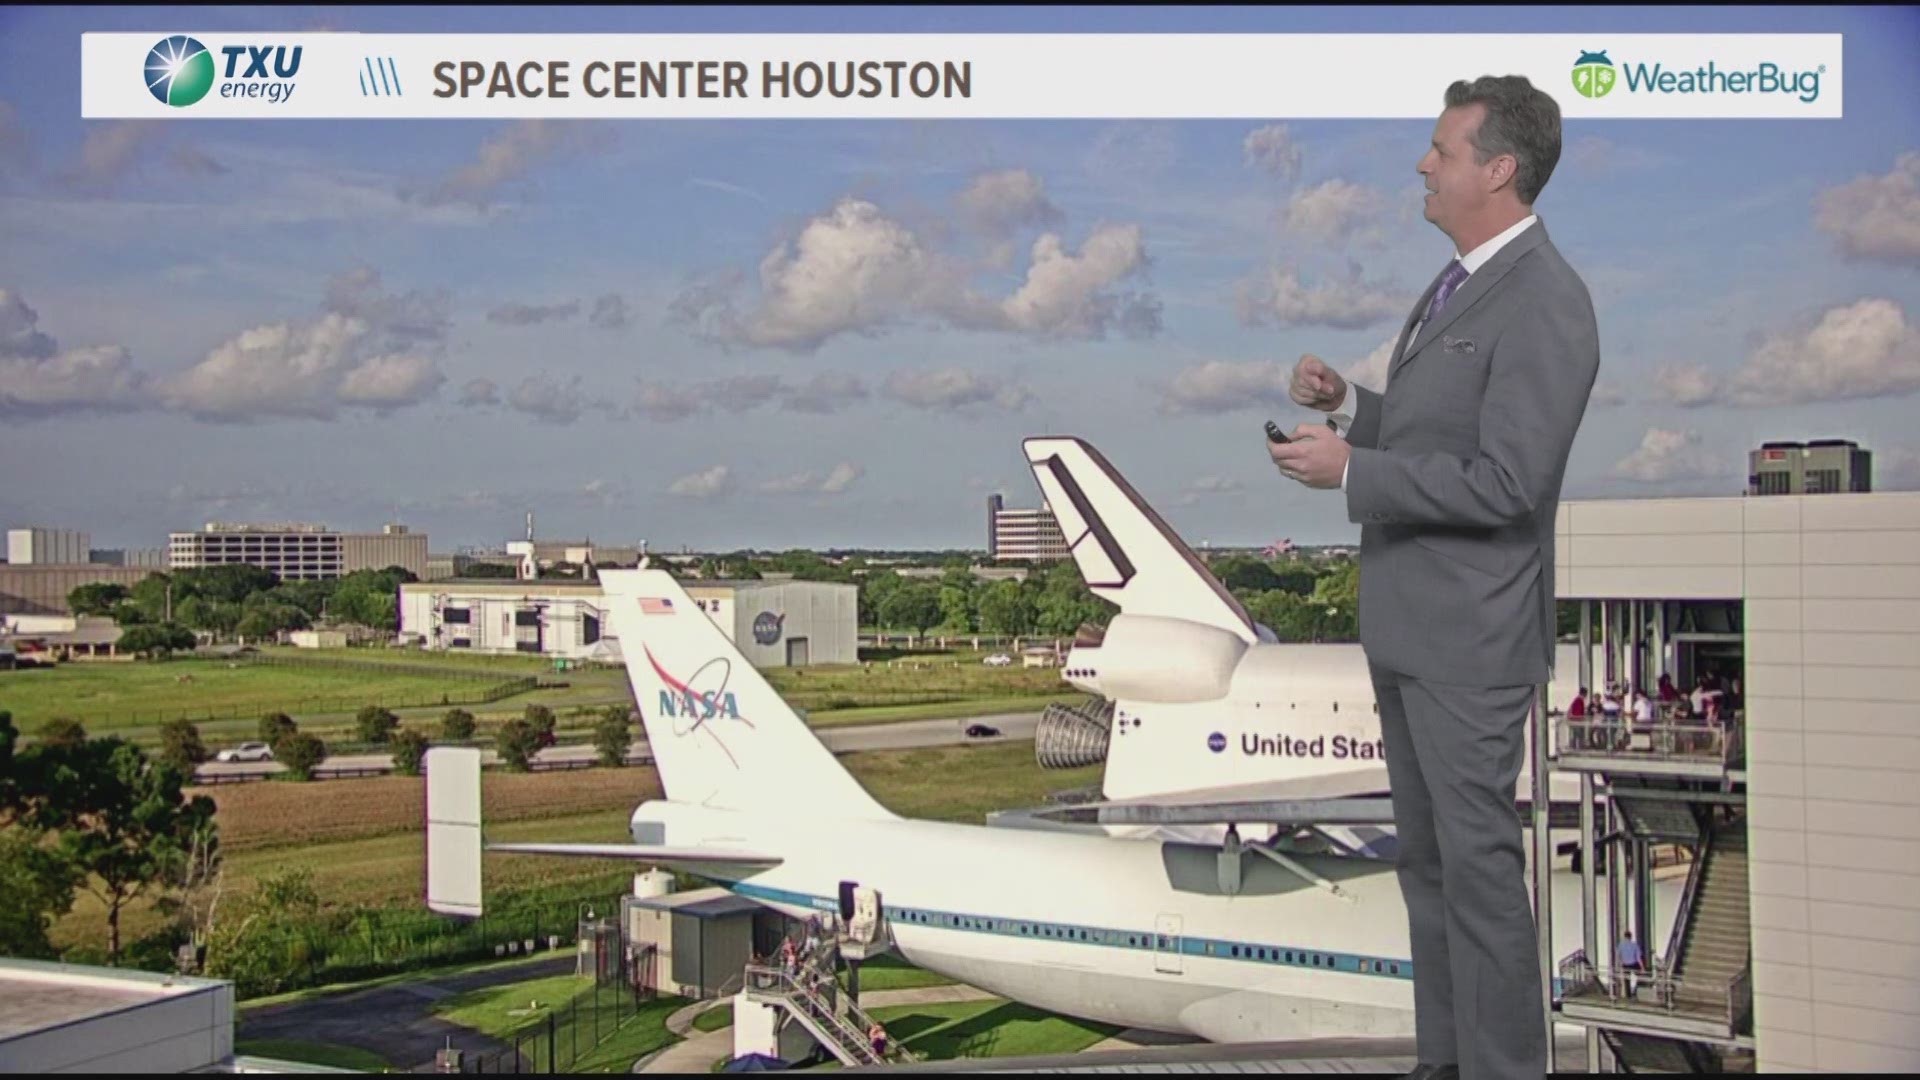 Do you plan to attend this weekend's events commemorating the 50th anniversary of Apollo 11? Chief Meteorologist David Paul has your forecast for Space City ahead of the celebrations.